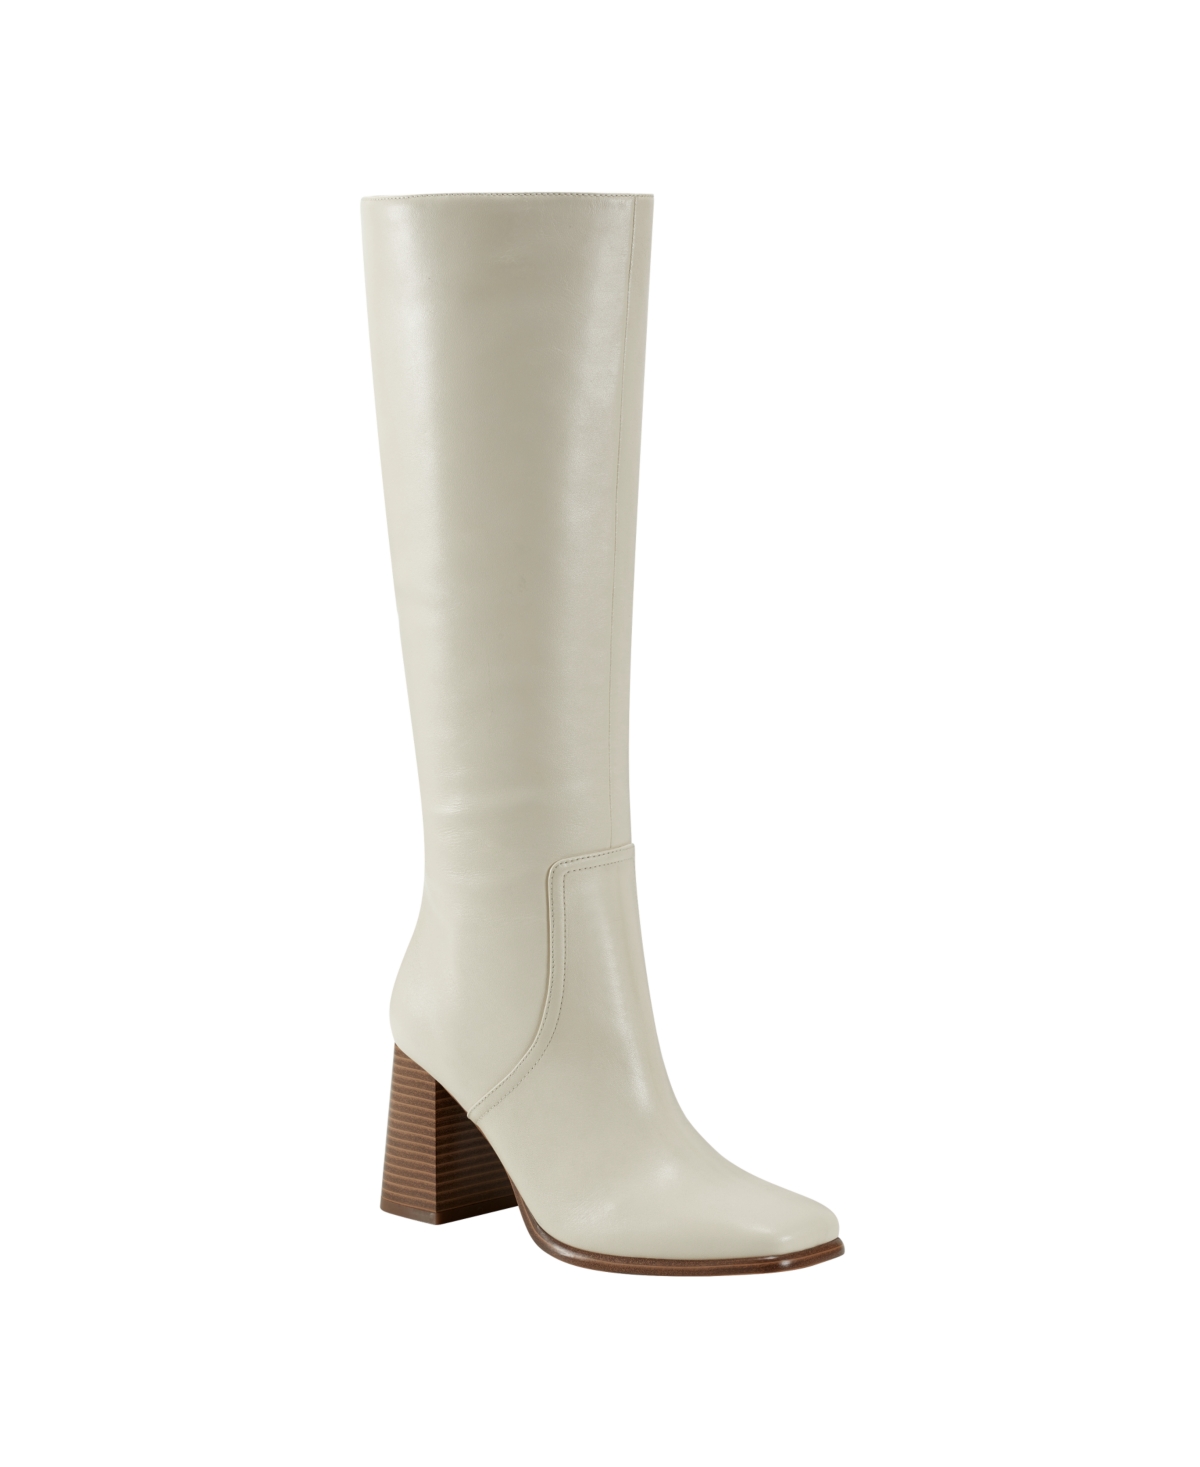 Women's Dacea Tapered Block Heel Dress Boots - Ivory Leather